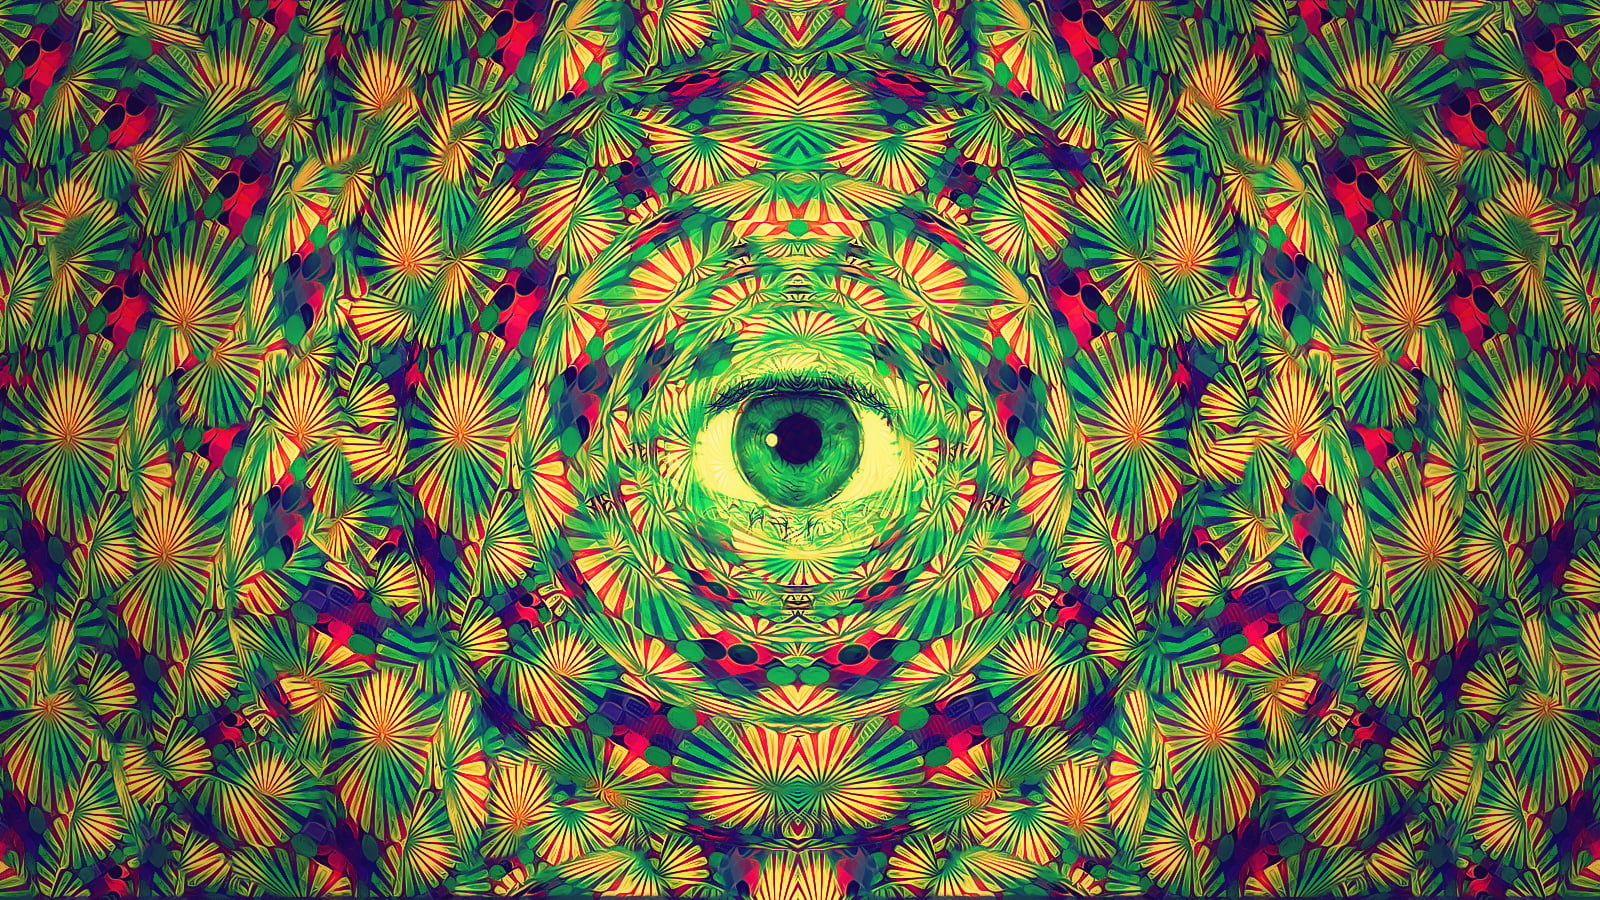 green, red, blue, and purple eye optical illusion wallpaper, psychedelic